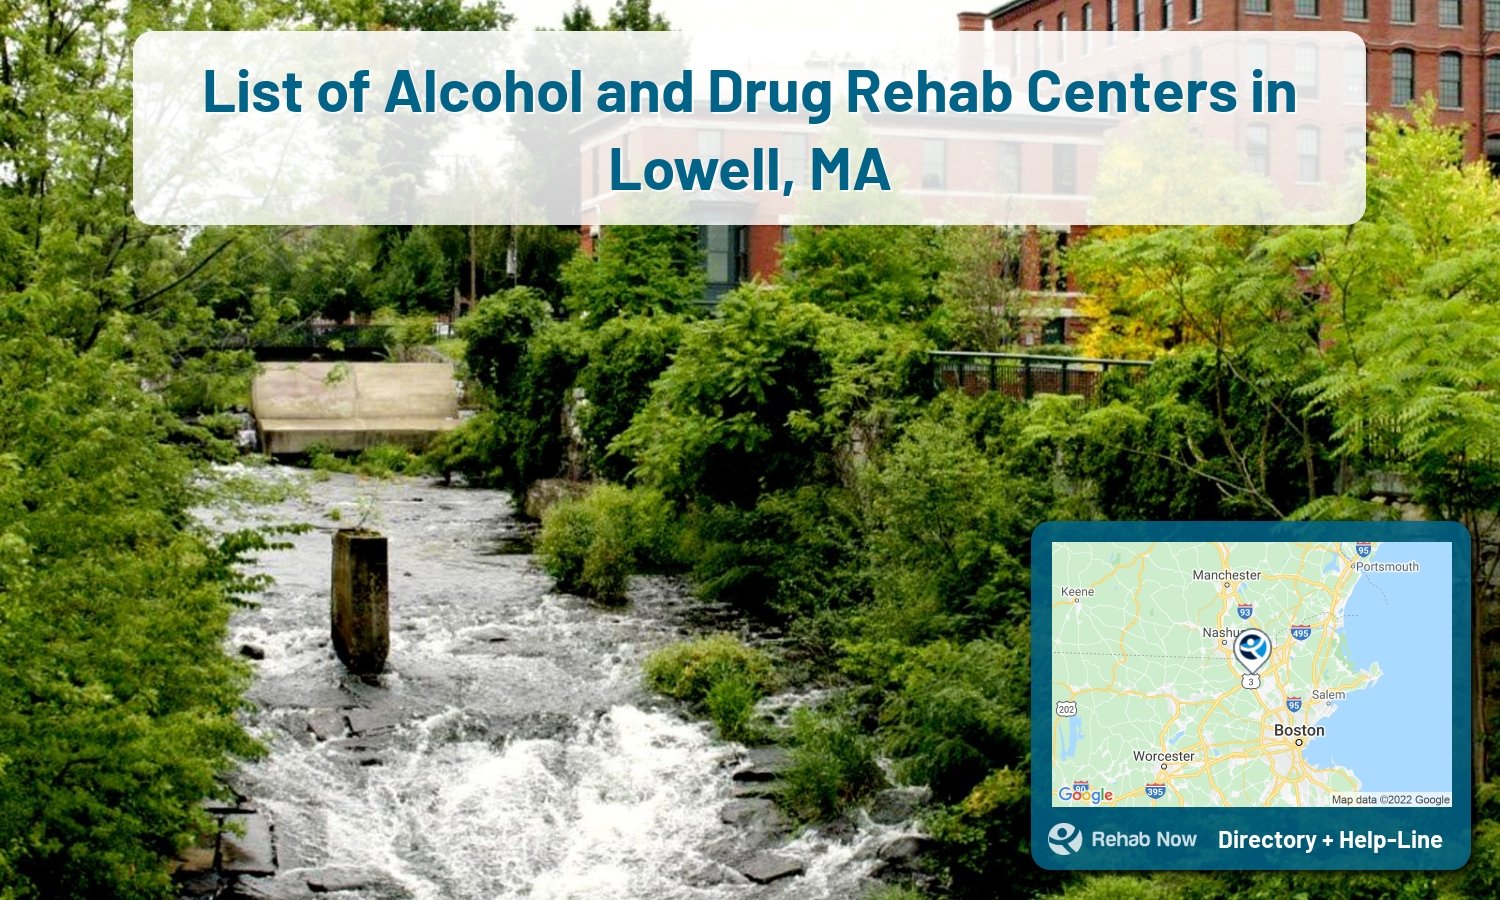 Lowell, MA Treatment Centers. Find drug rehab in Lowell, Massachusetts, or detox and treatment programs. Get the right help now!